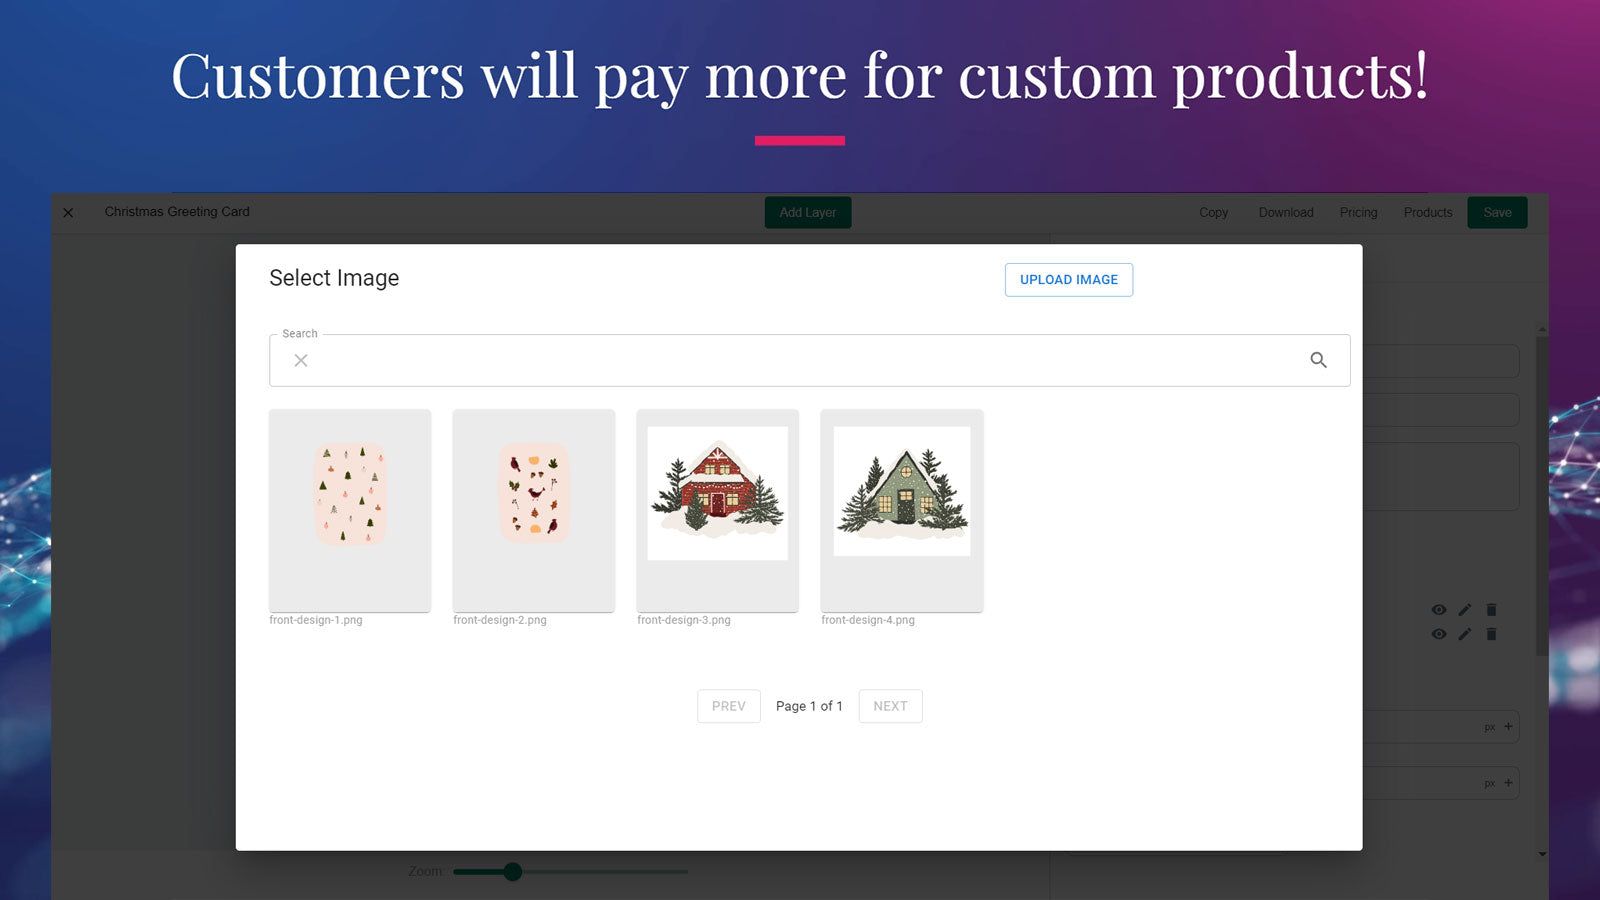 Allow customers to upload custom images, select from image galle